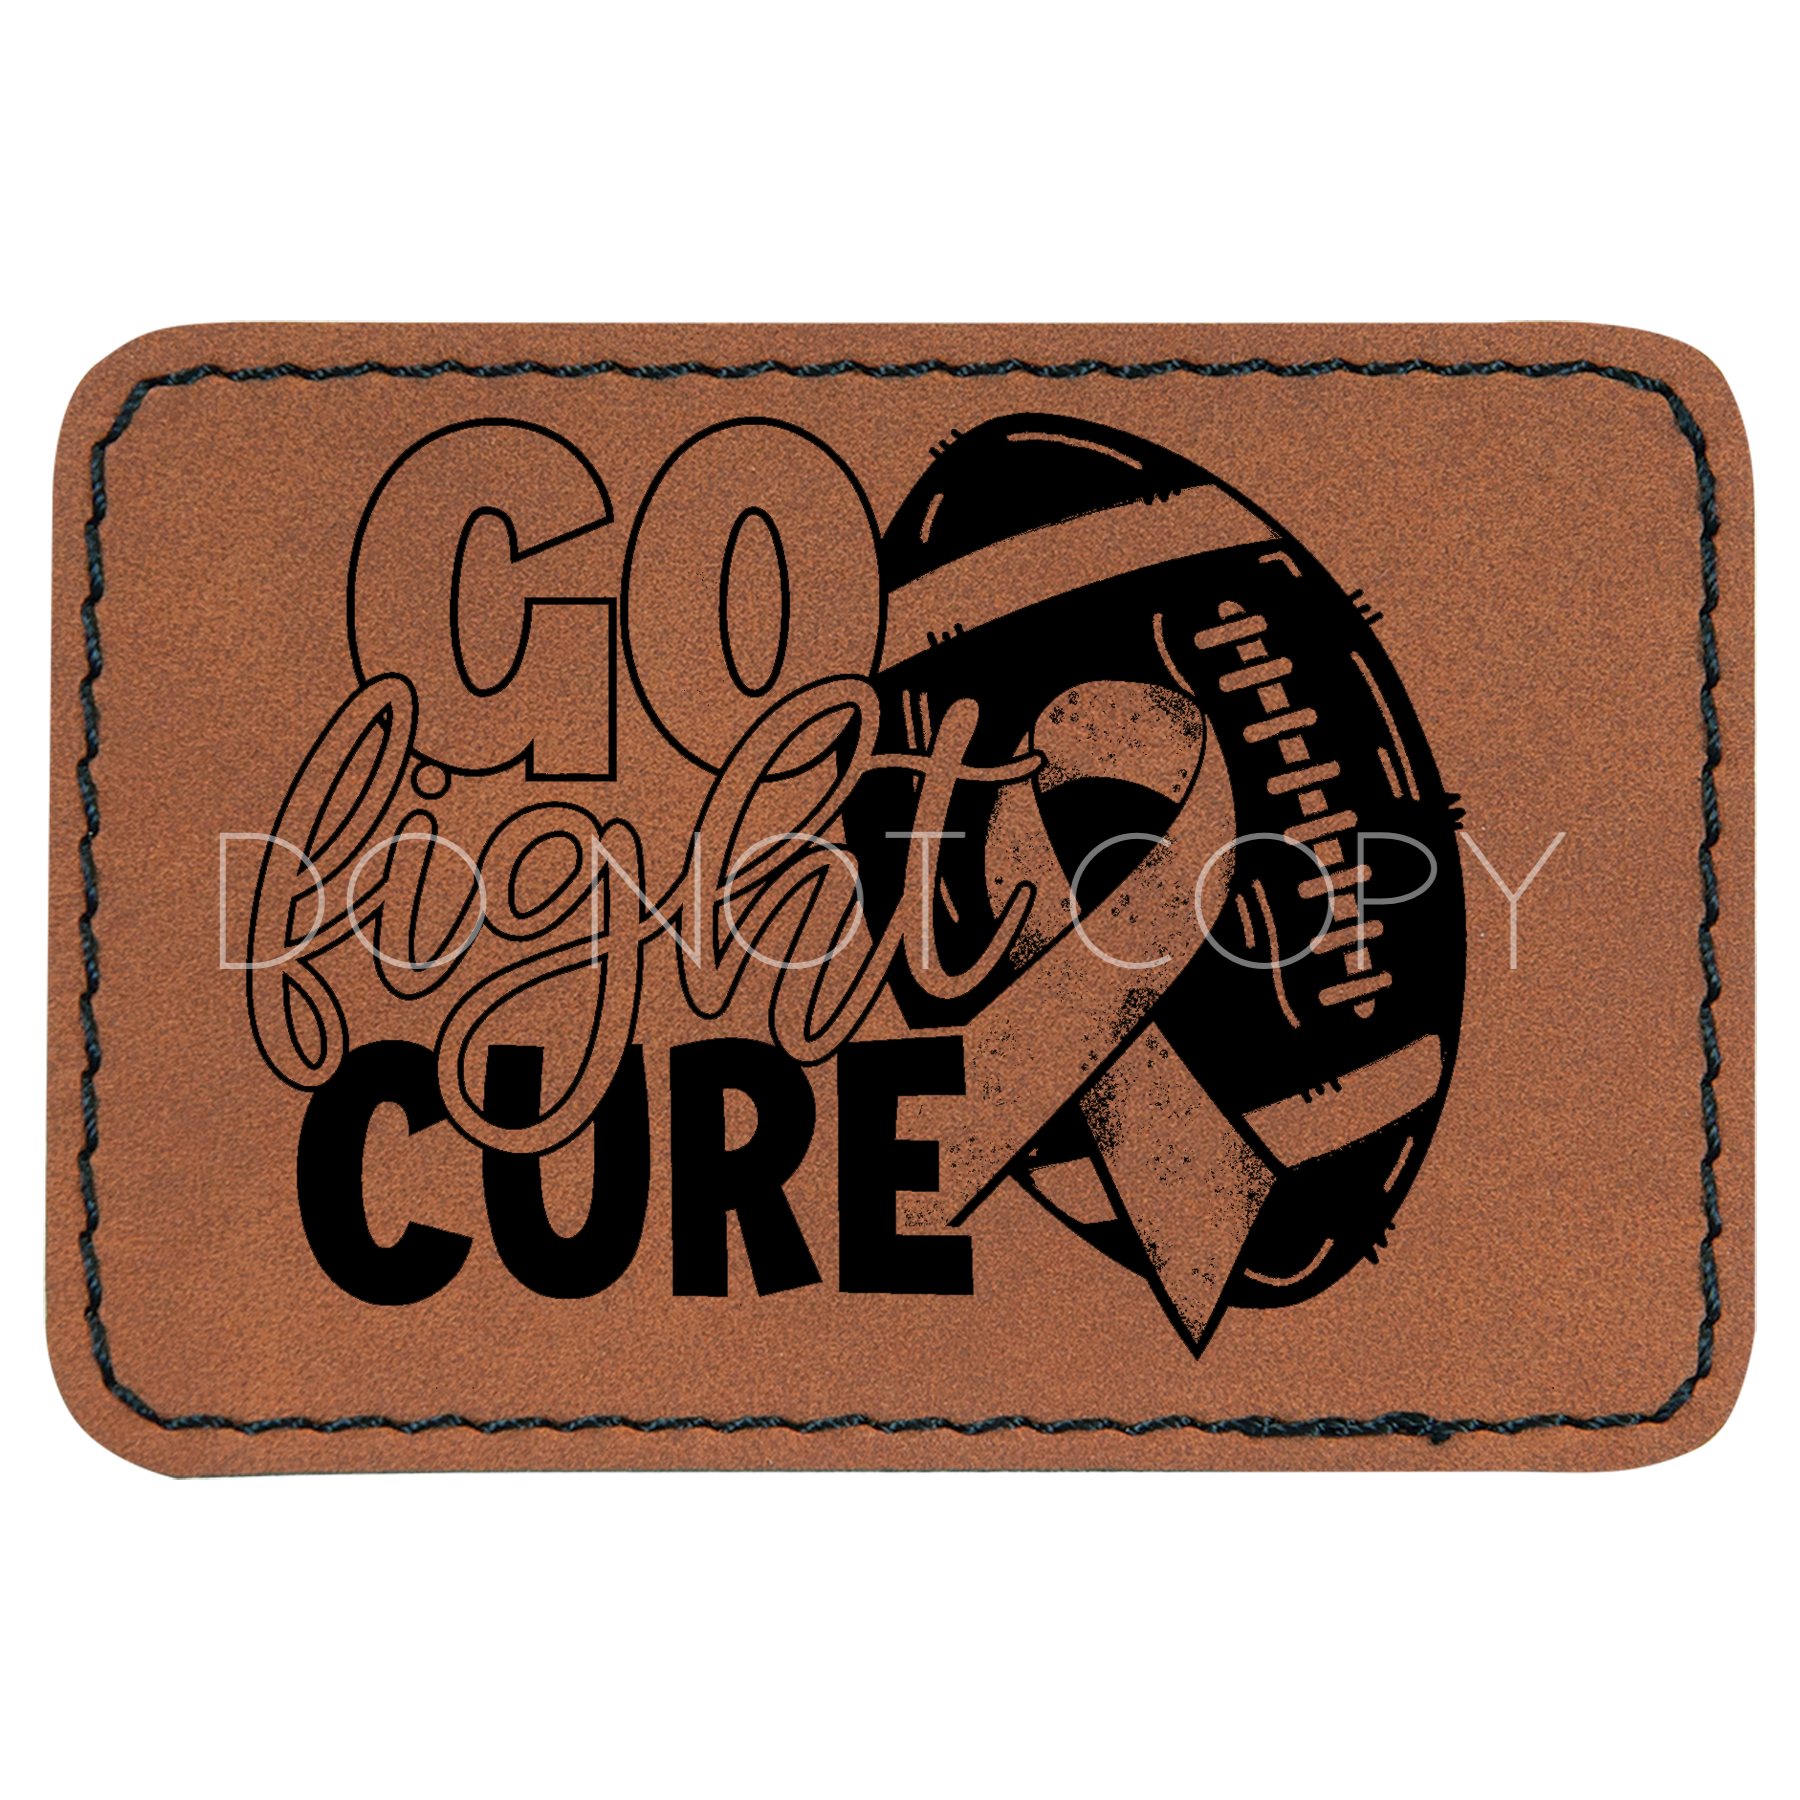 Go Fight Cure Patch